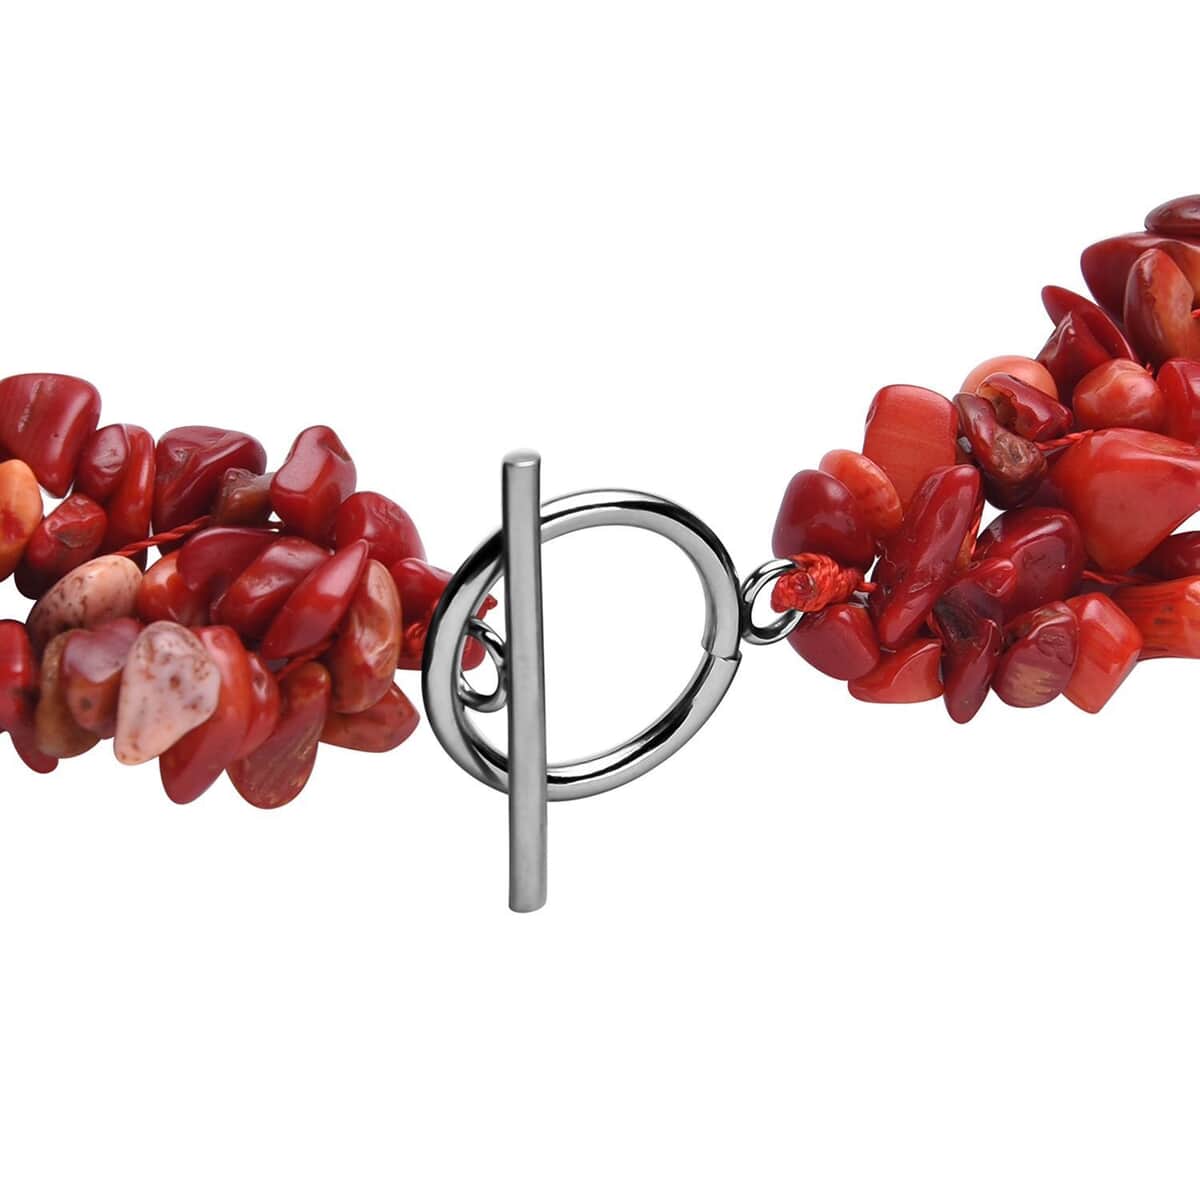 Bamboo Coral Chips Stretch Bracelet and Earrings and Toggle Clasp Necklace in Black Oxidized Stainless Steel (18.00 In) image number 4